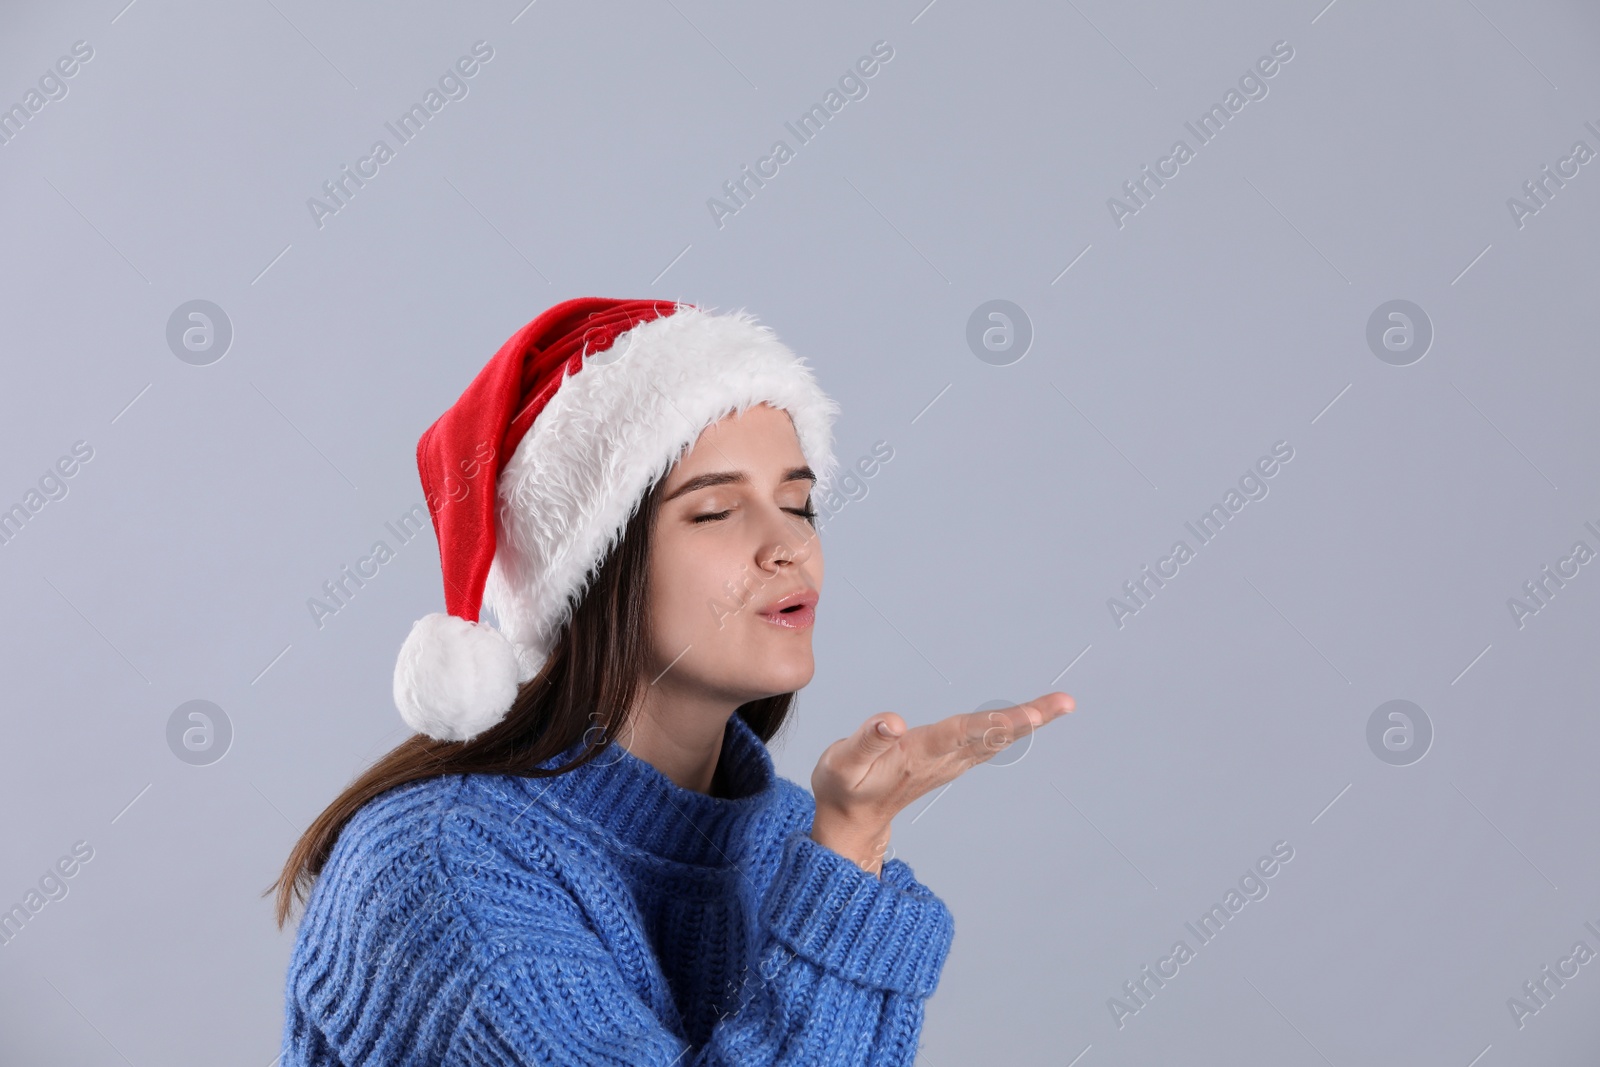 Photo of Pretty woman in Santa hat and blue sweater blowing kiss on grey background, space for text